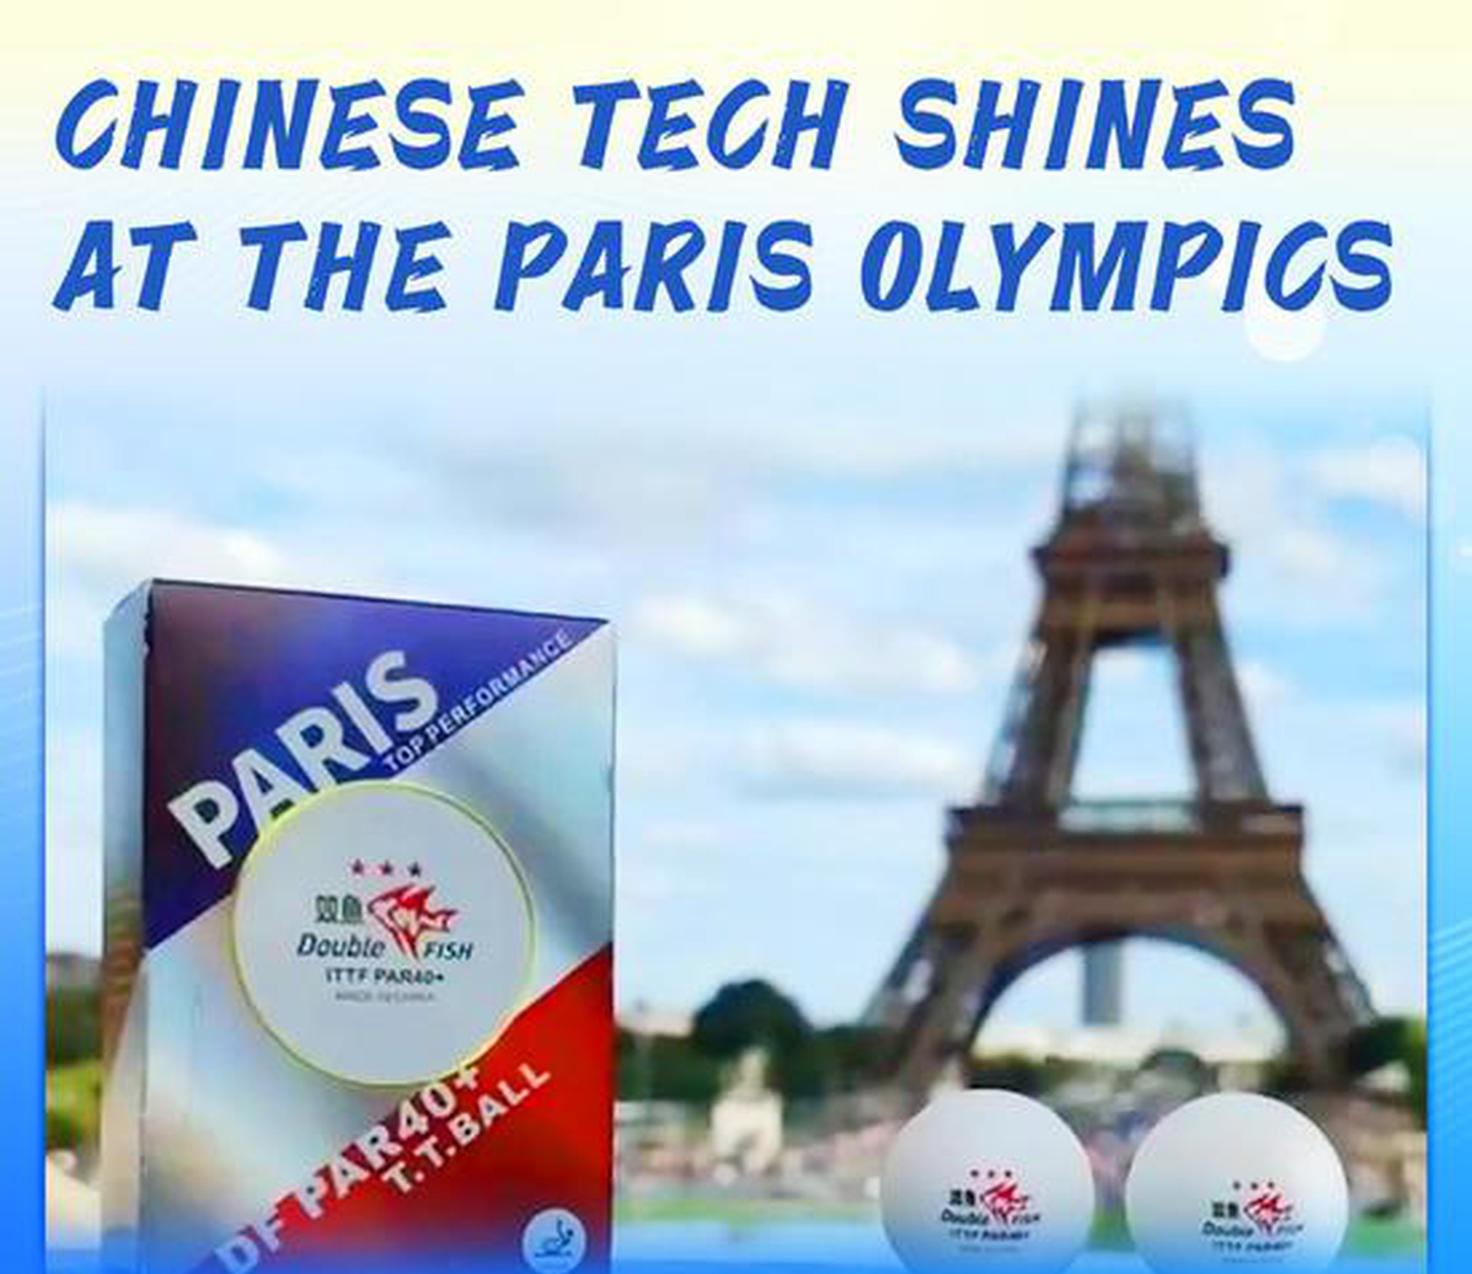 Chinese tech shines at the Paris Olympics